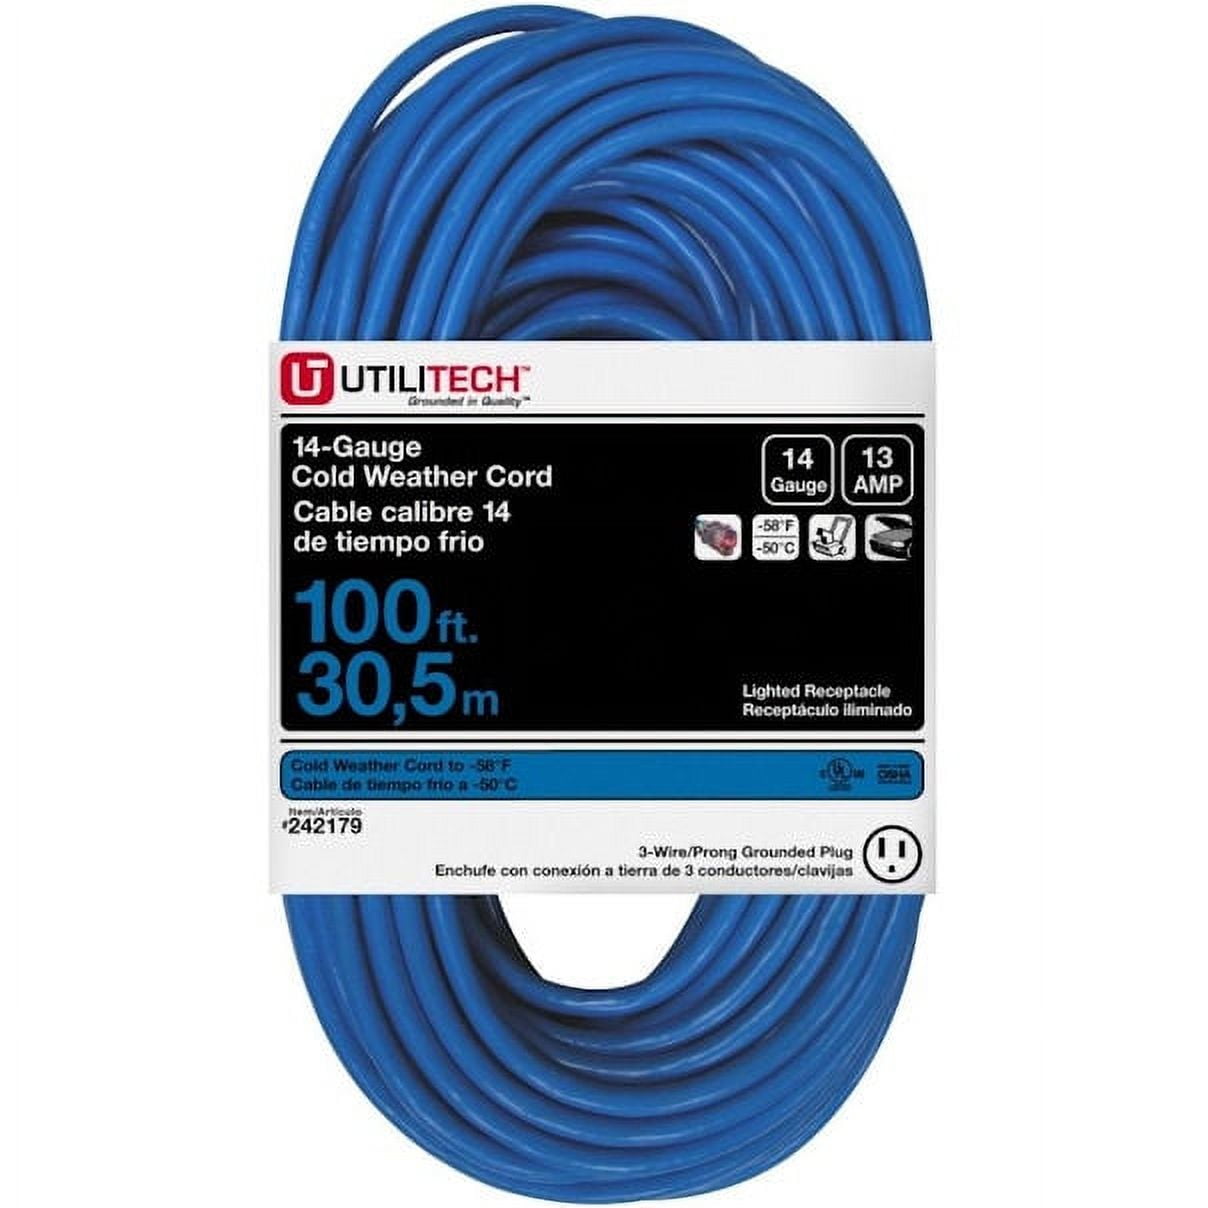 LUMAPRO, 40 ft Retractable Cord Lg, 14 AWG Wire Size, Extension